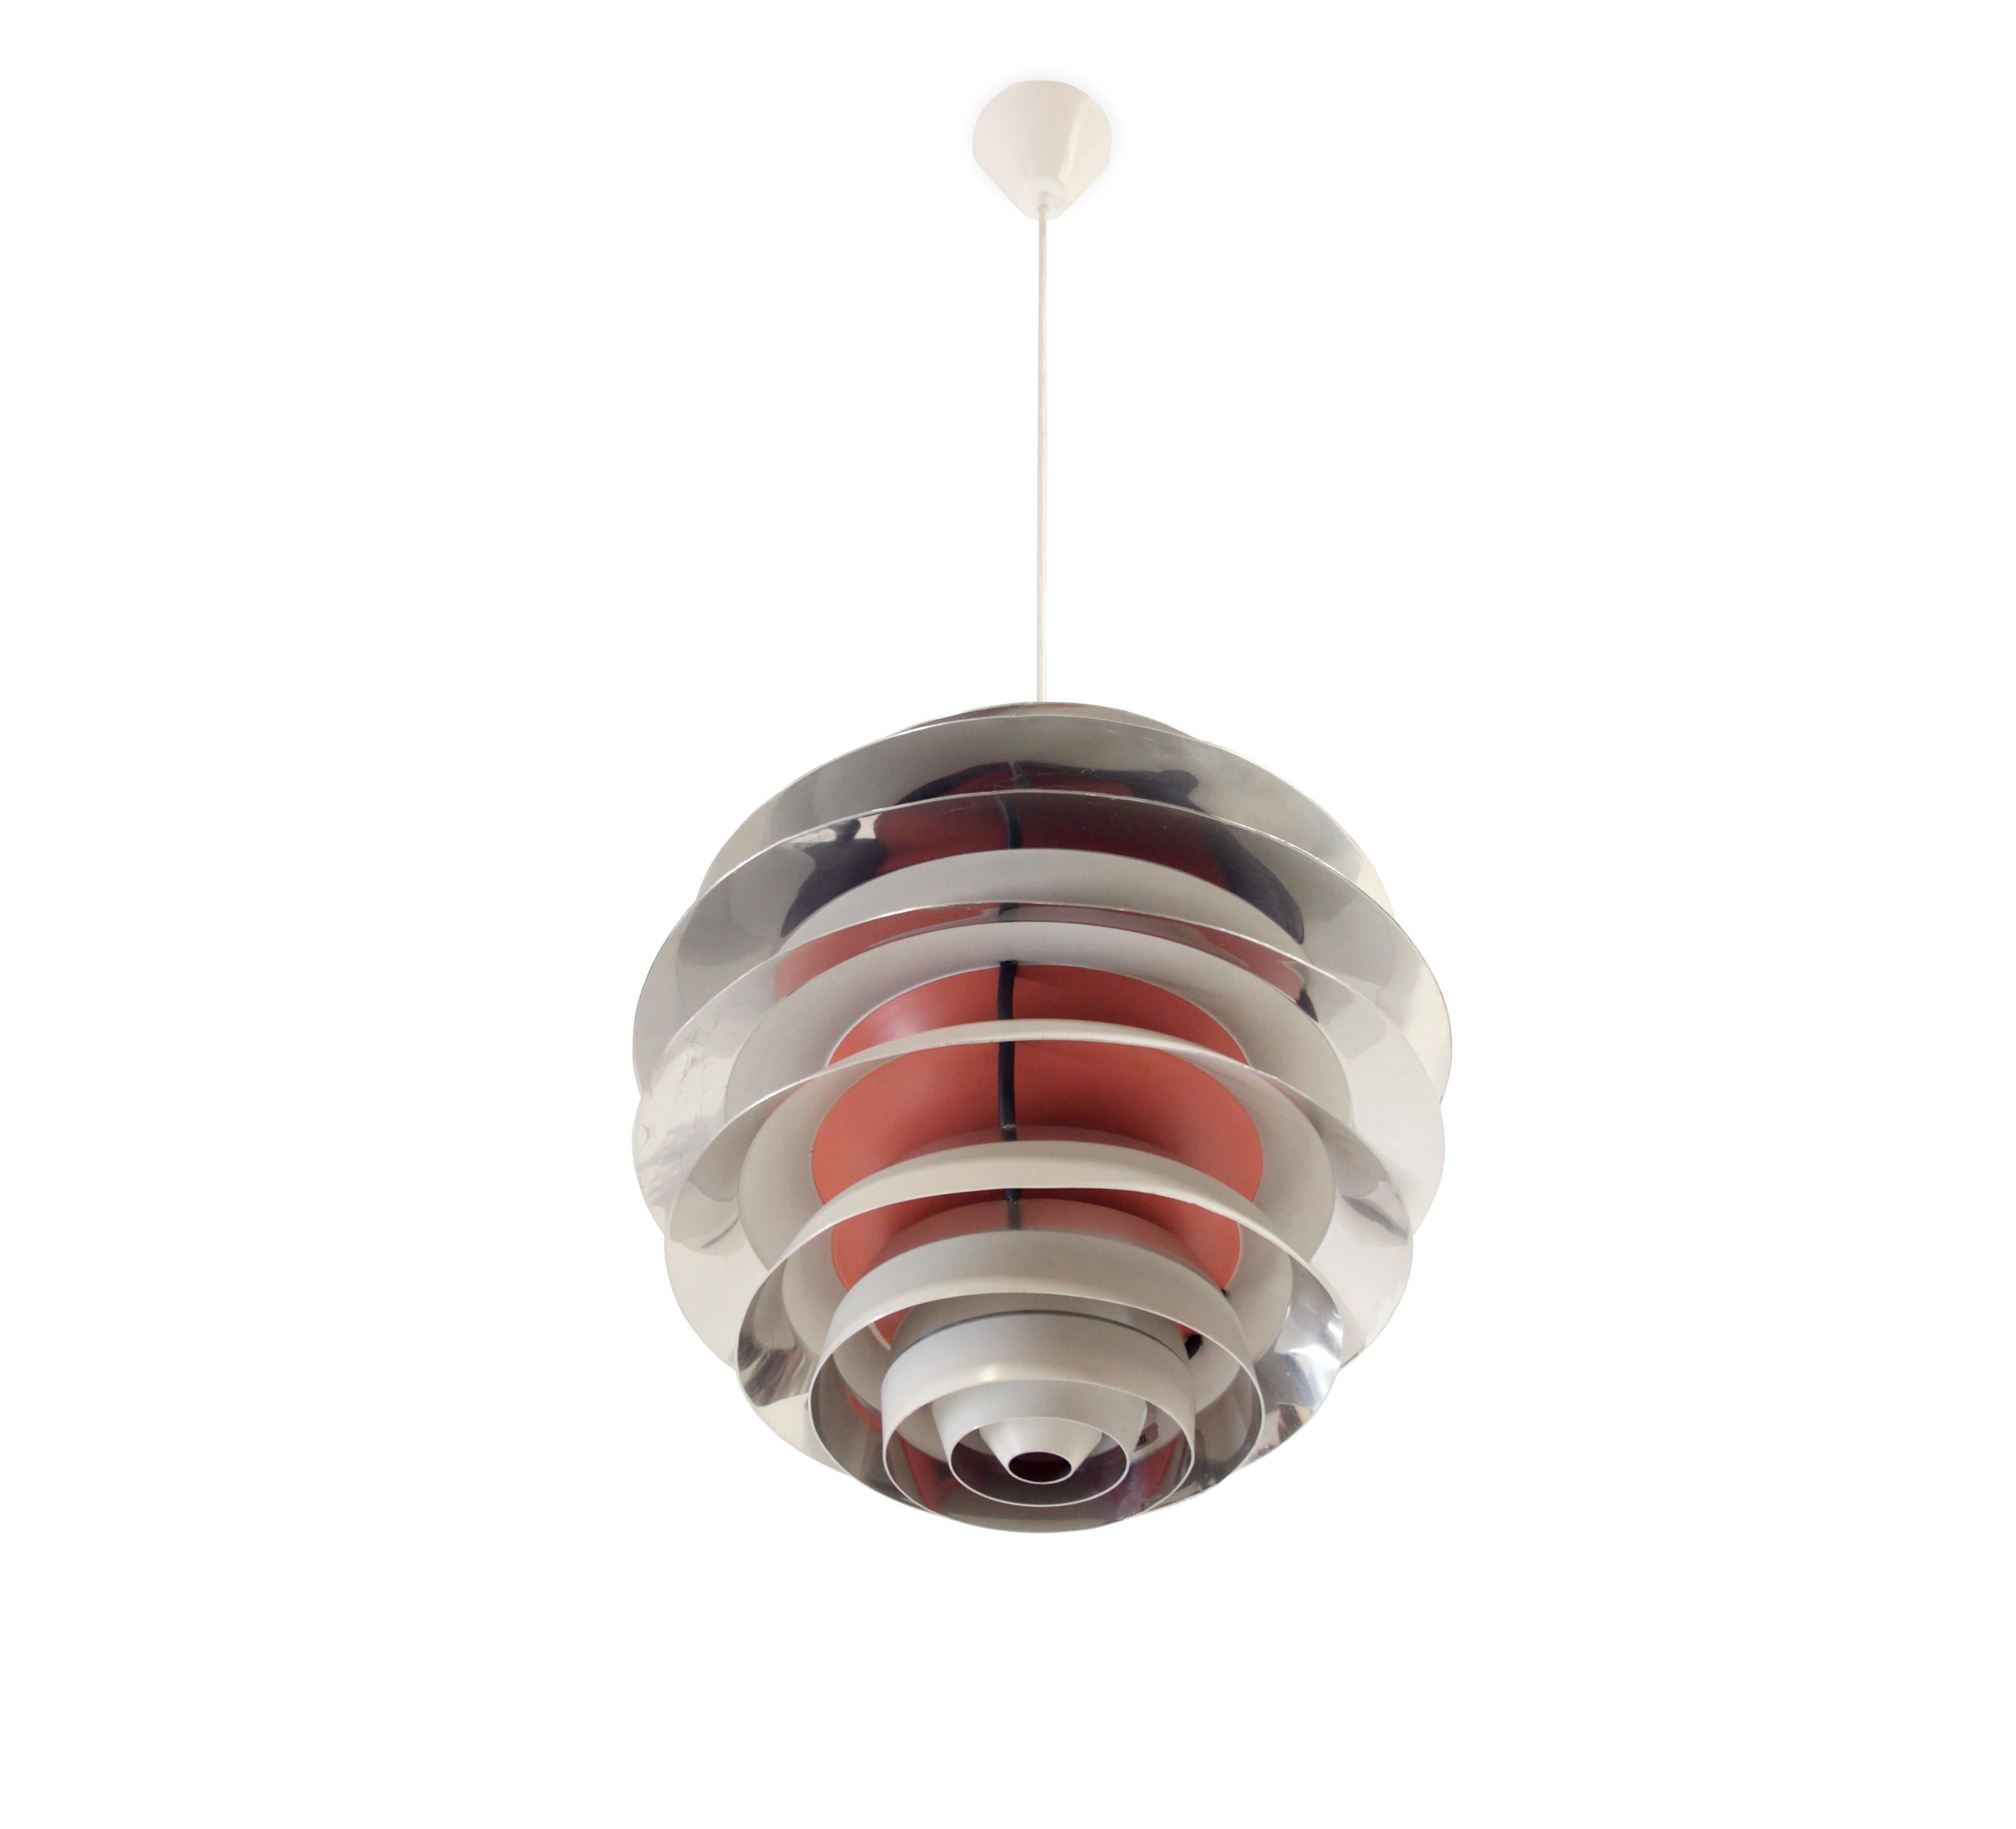 Beautiful ceiling lamp designed by Poul Henningsen and manufactured in Denmark by Louis Poulsen from 1960s second half. This is the 'Kontrast' model which was a an innovation in that you could adjust the light flow yourself. This model is fully